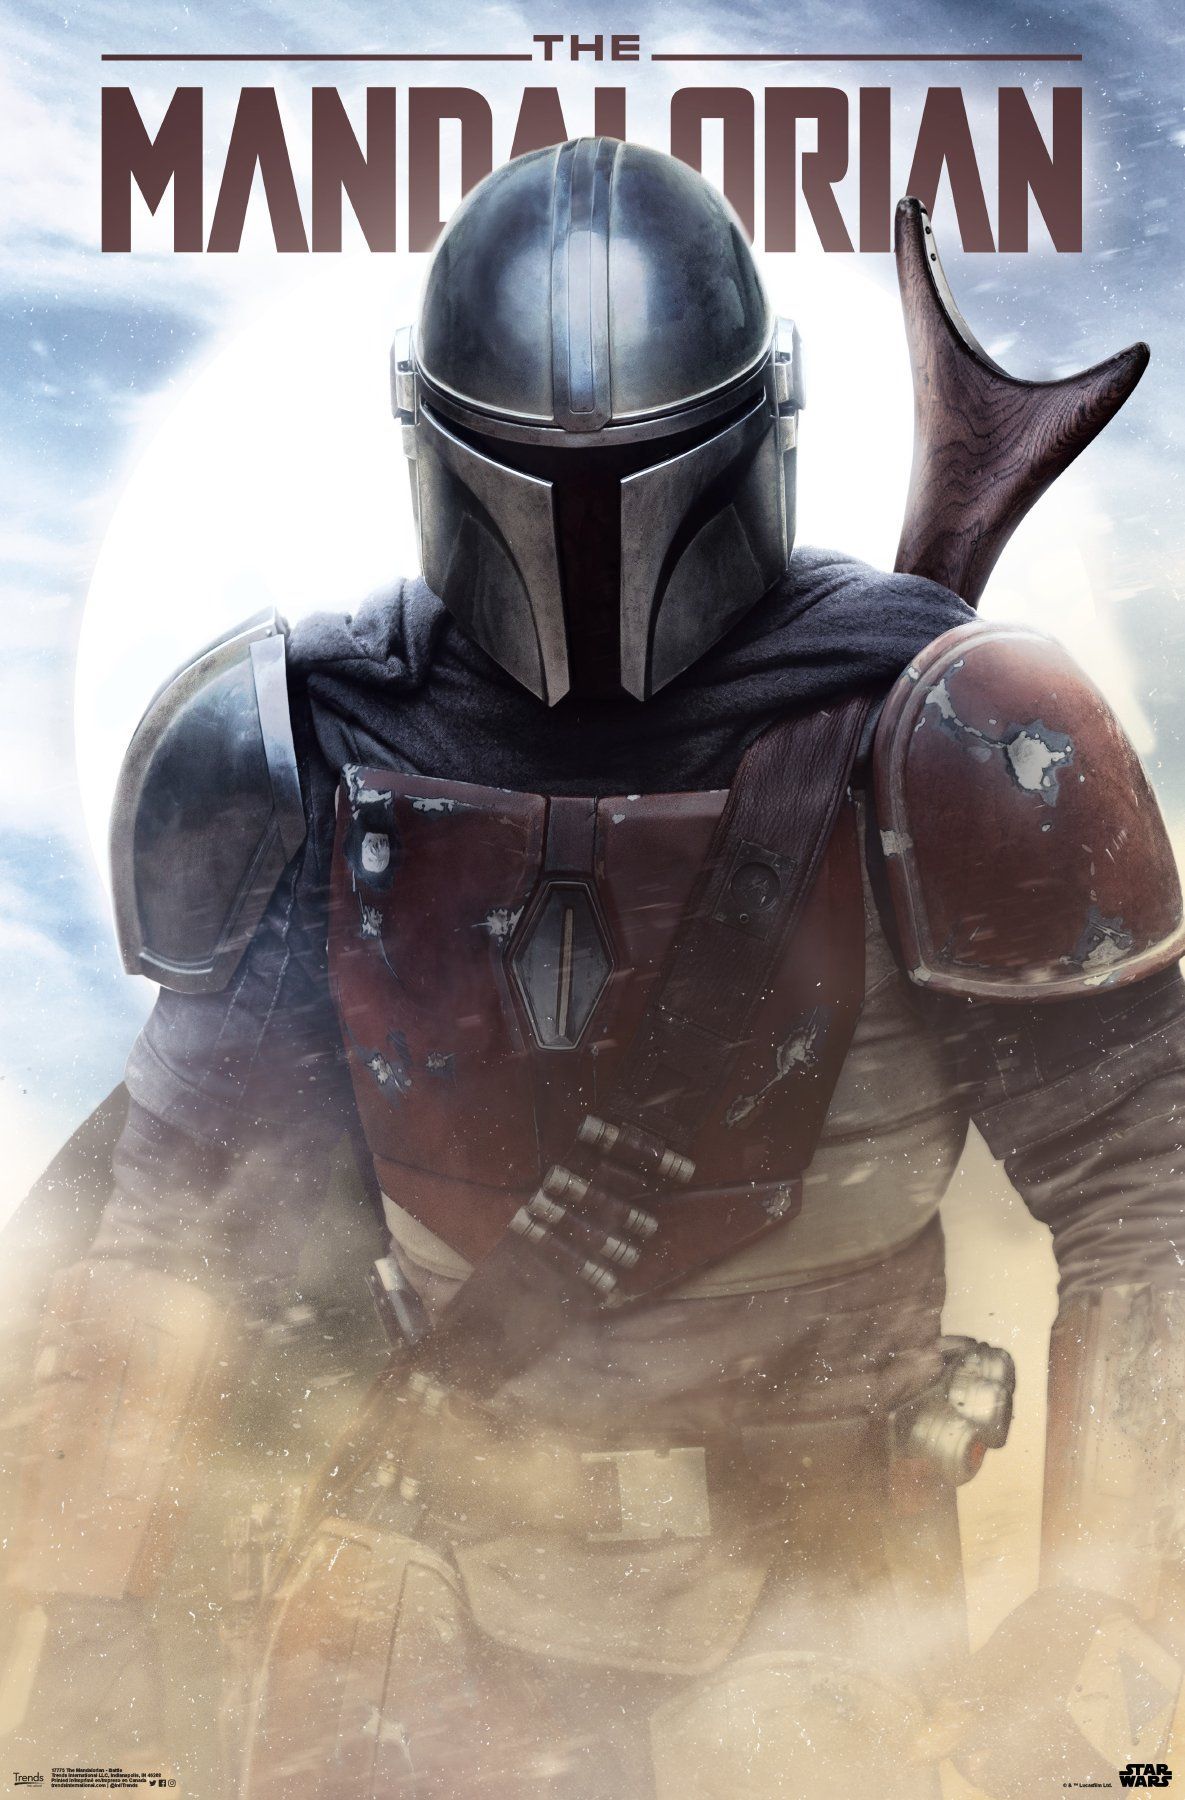 New Posters For 'The Mandalorian' And High Res Versions Of Previously Revealed 'The Rise Of Skywalker' Marketing Image Wars News Net